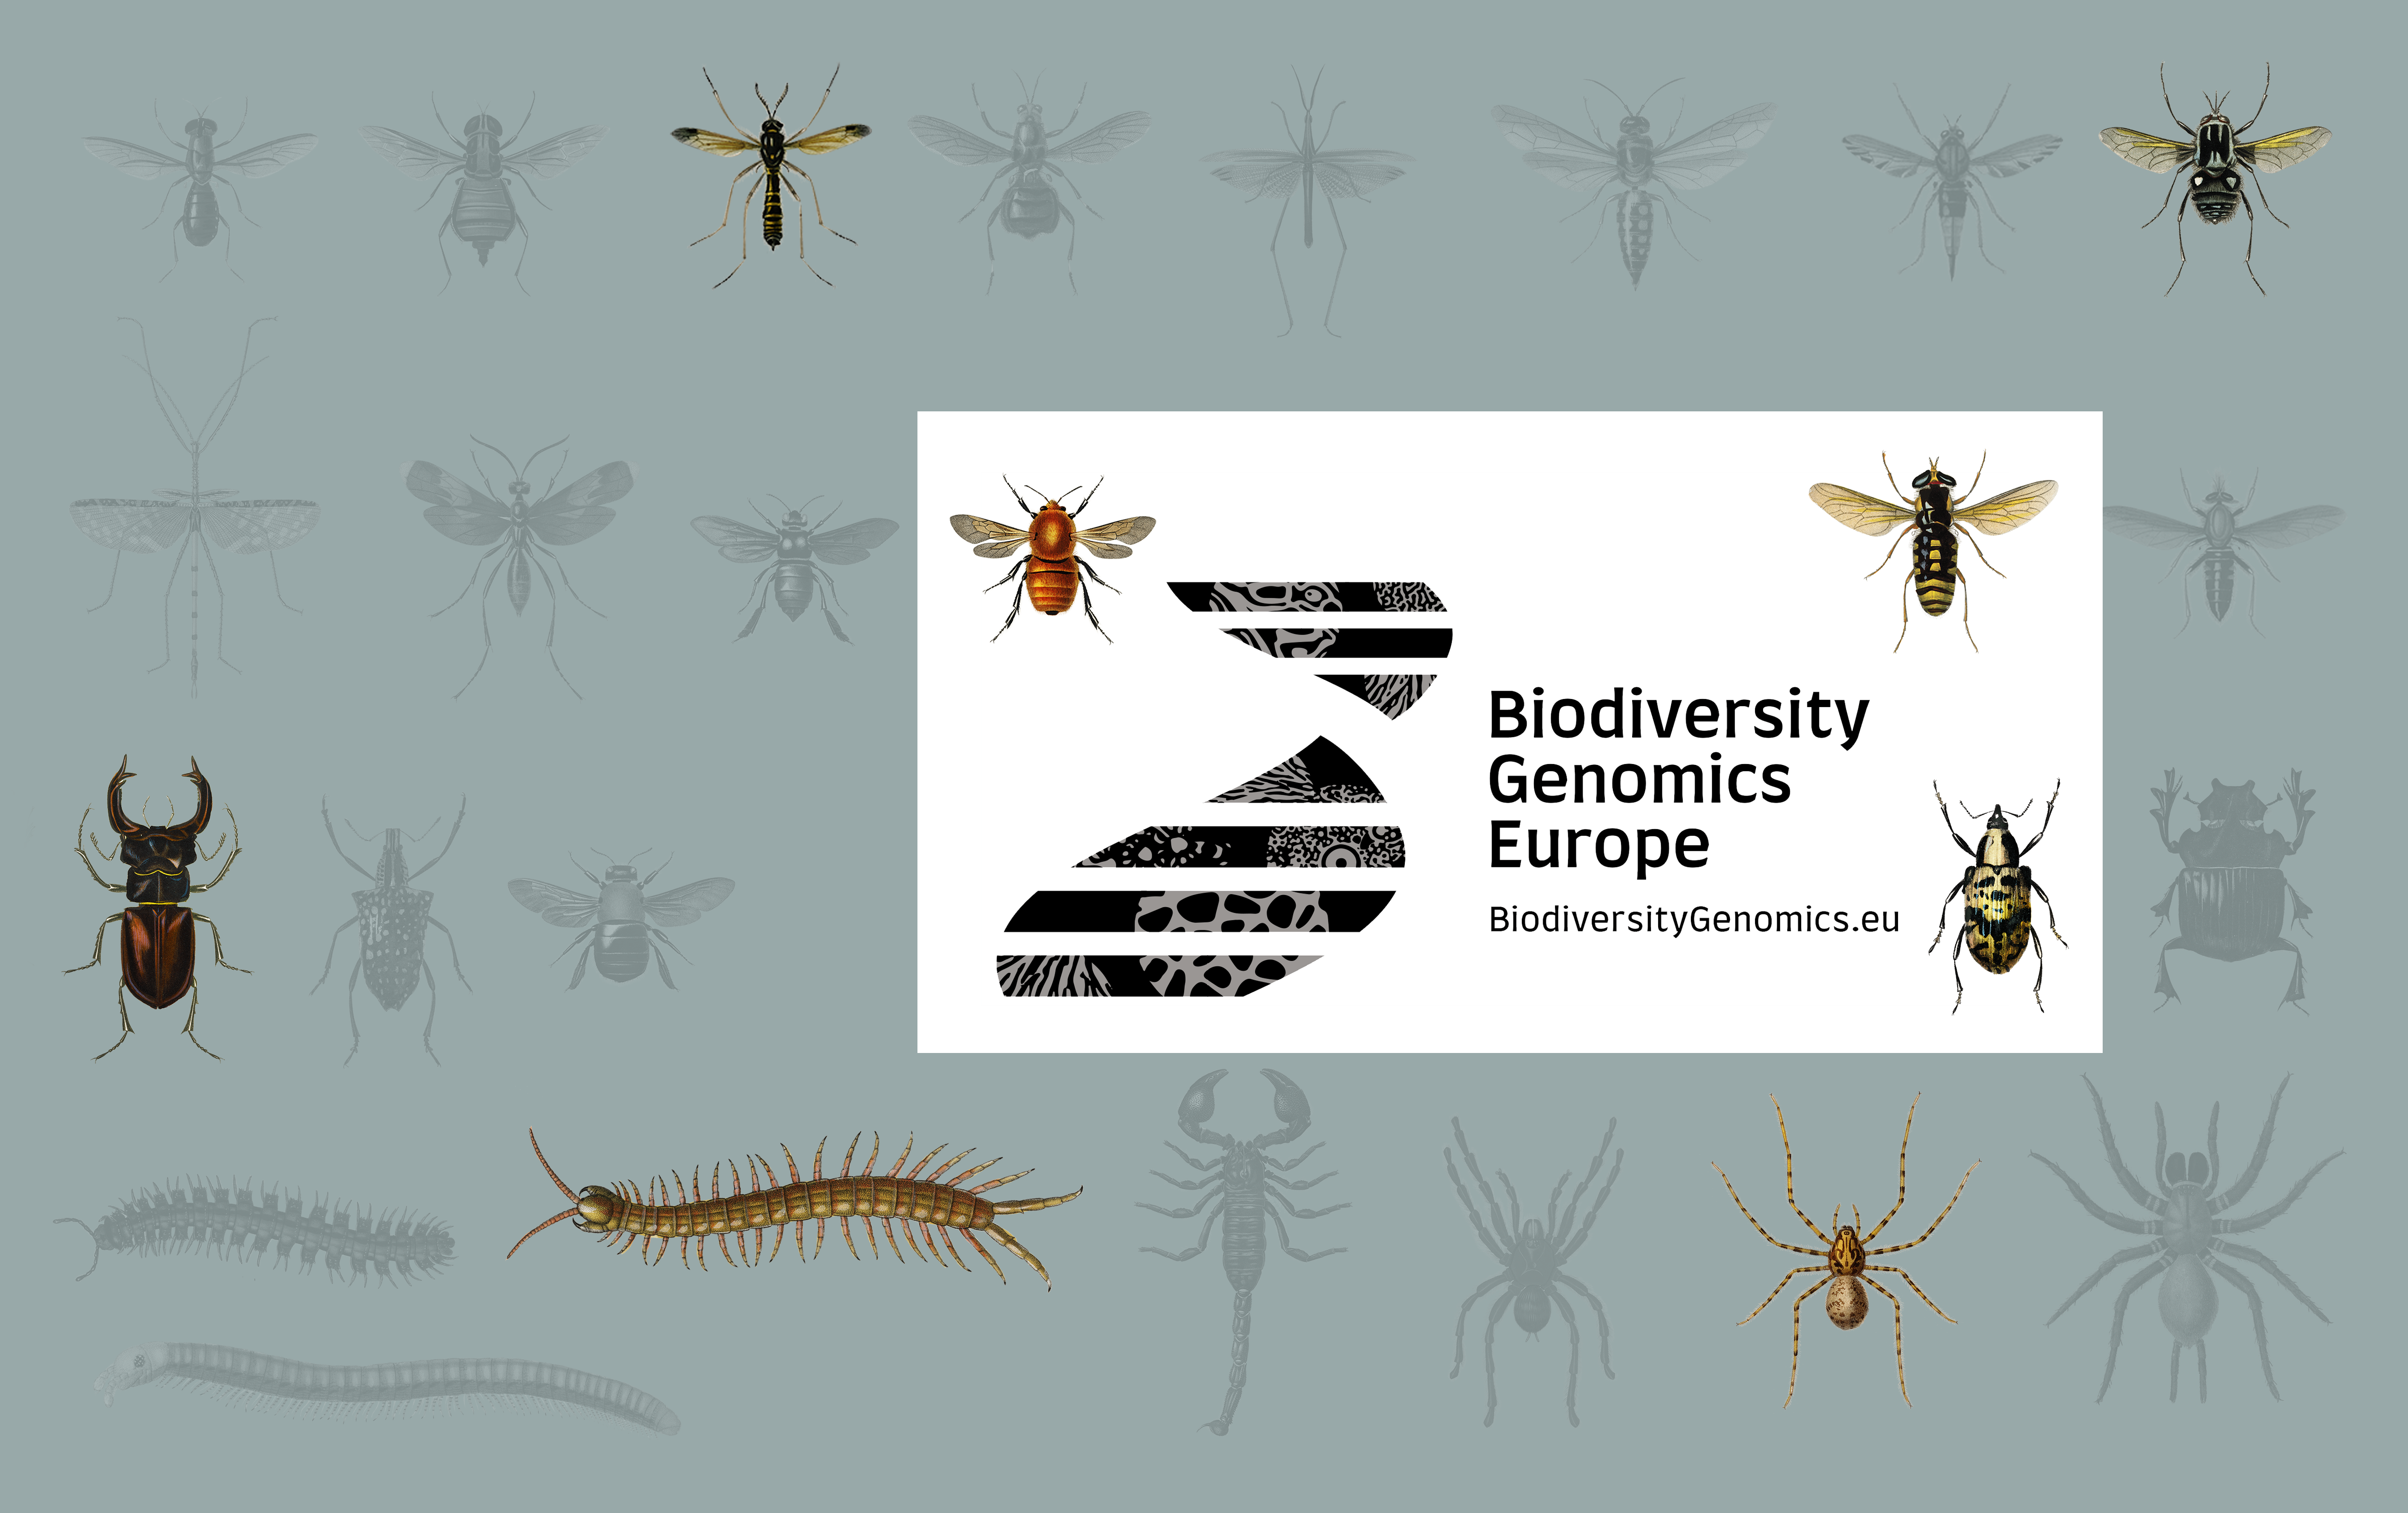 Postdoctoral Fellow for the BIOSCAN UK project - Insect diversity